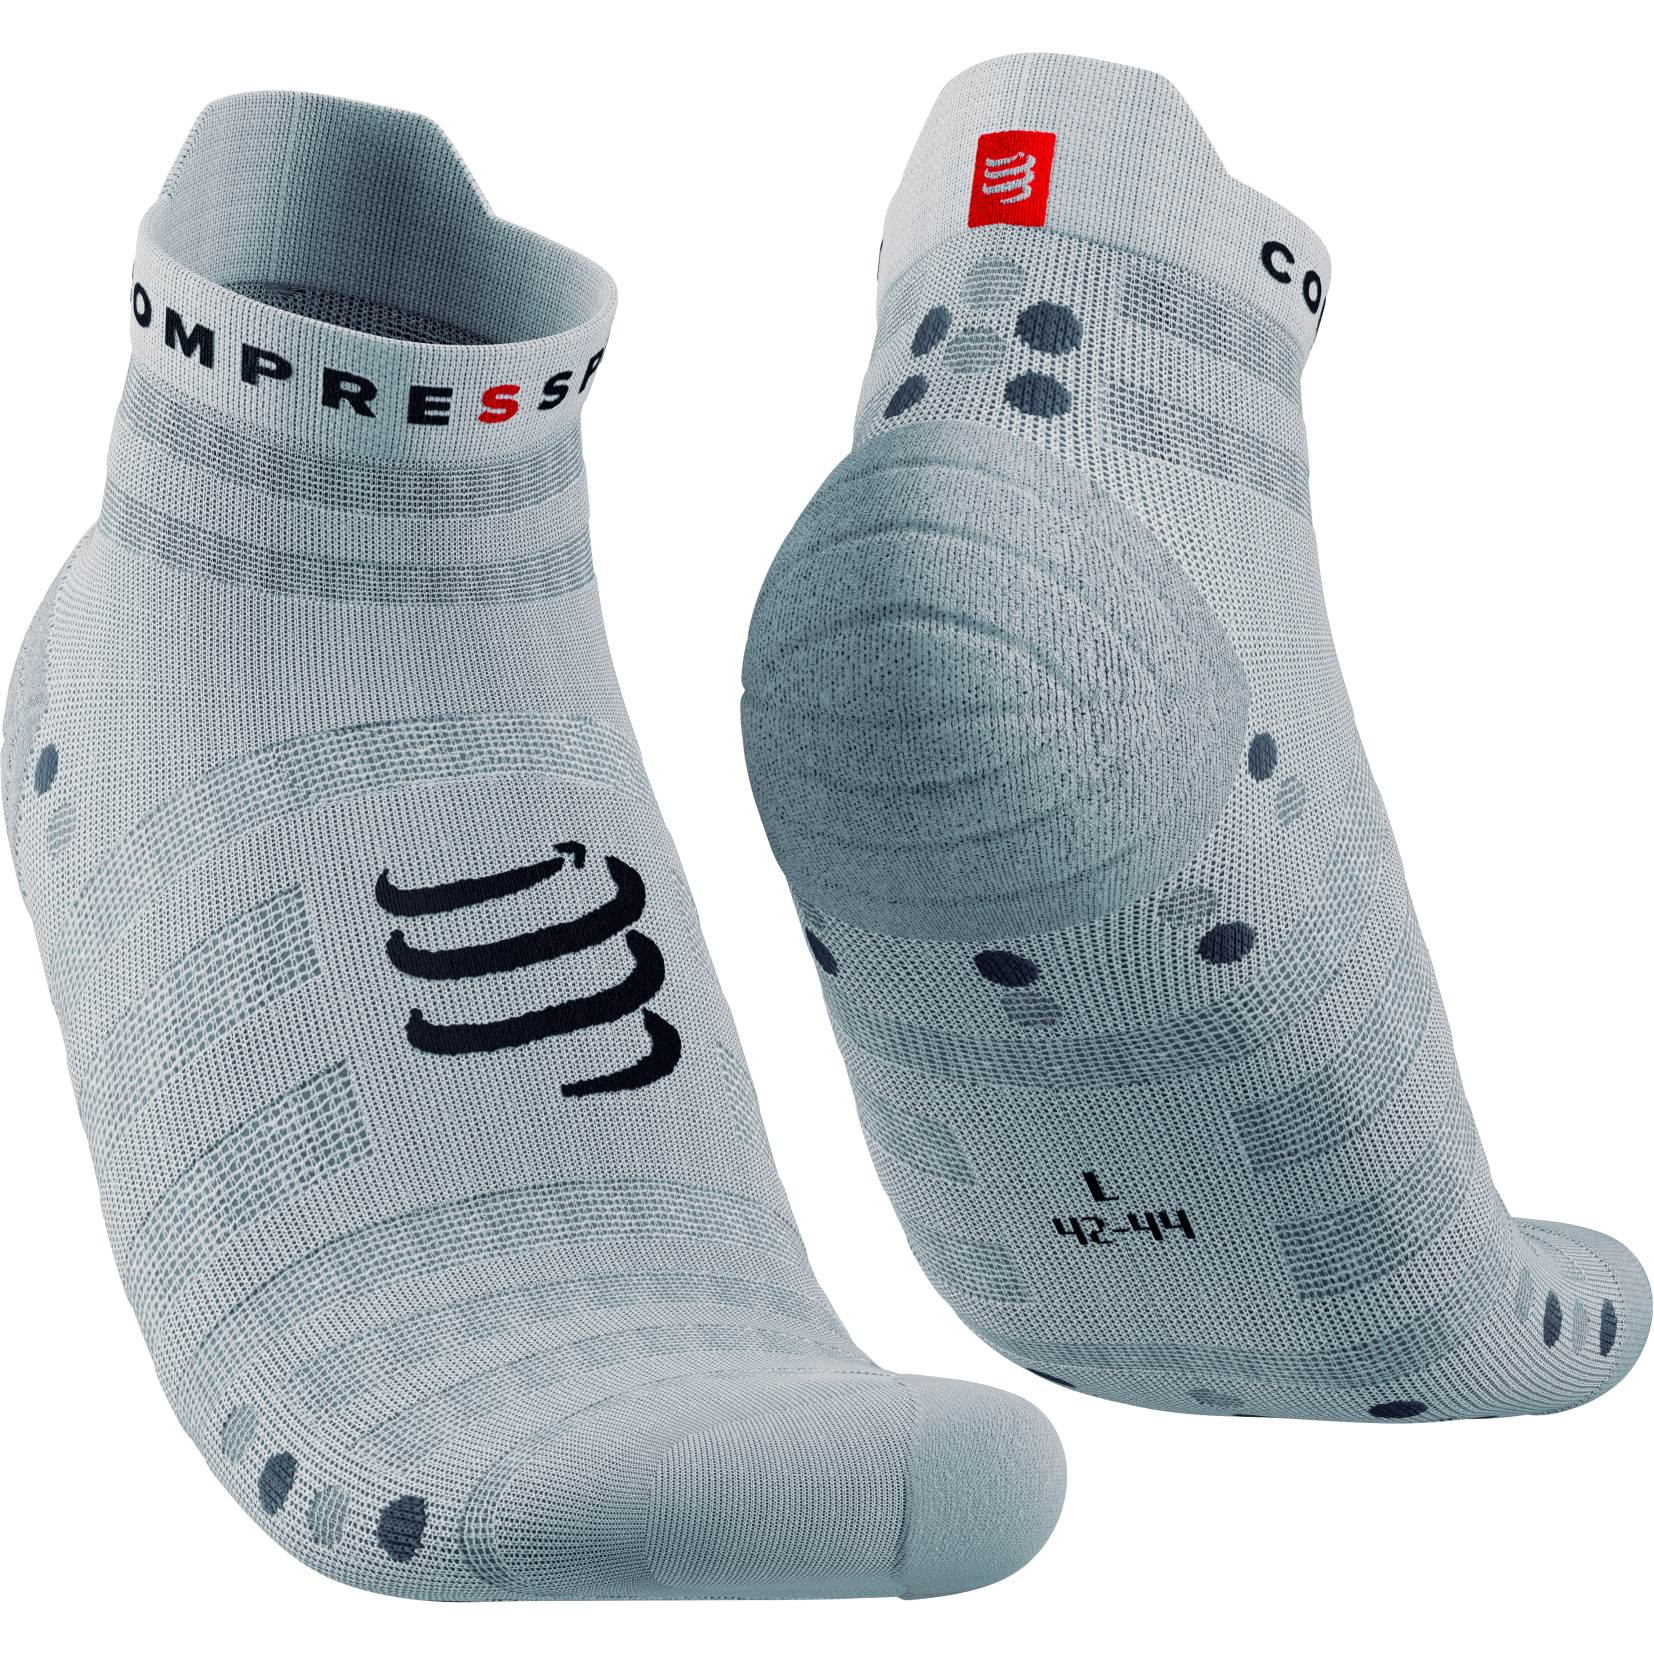 Picture of Compressport Pro Racing Compression Socks v4.0 Ultralight Run Low - white/alloy